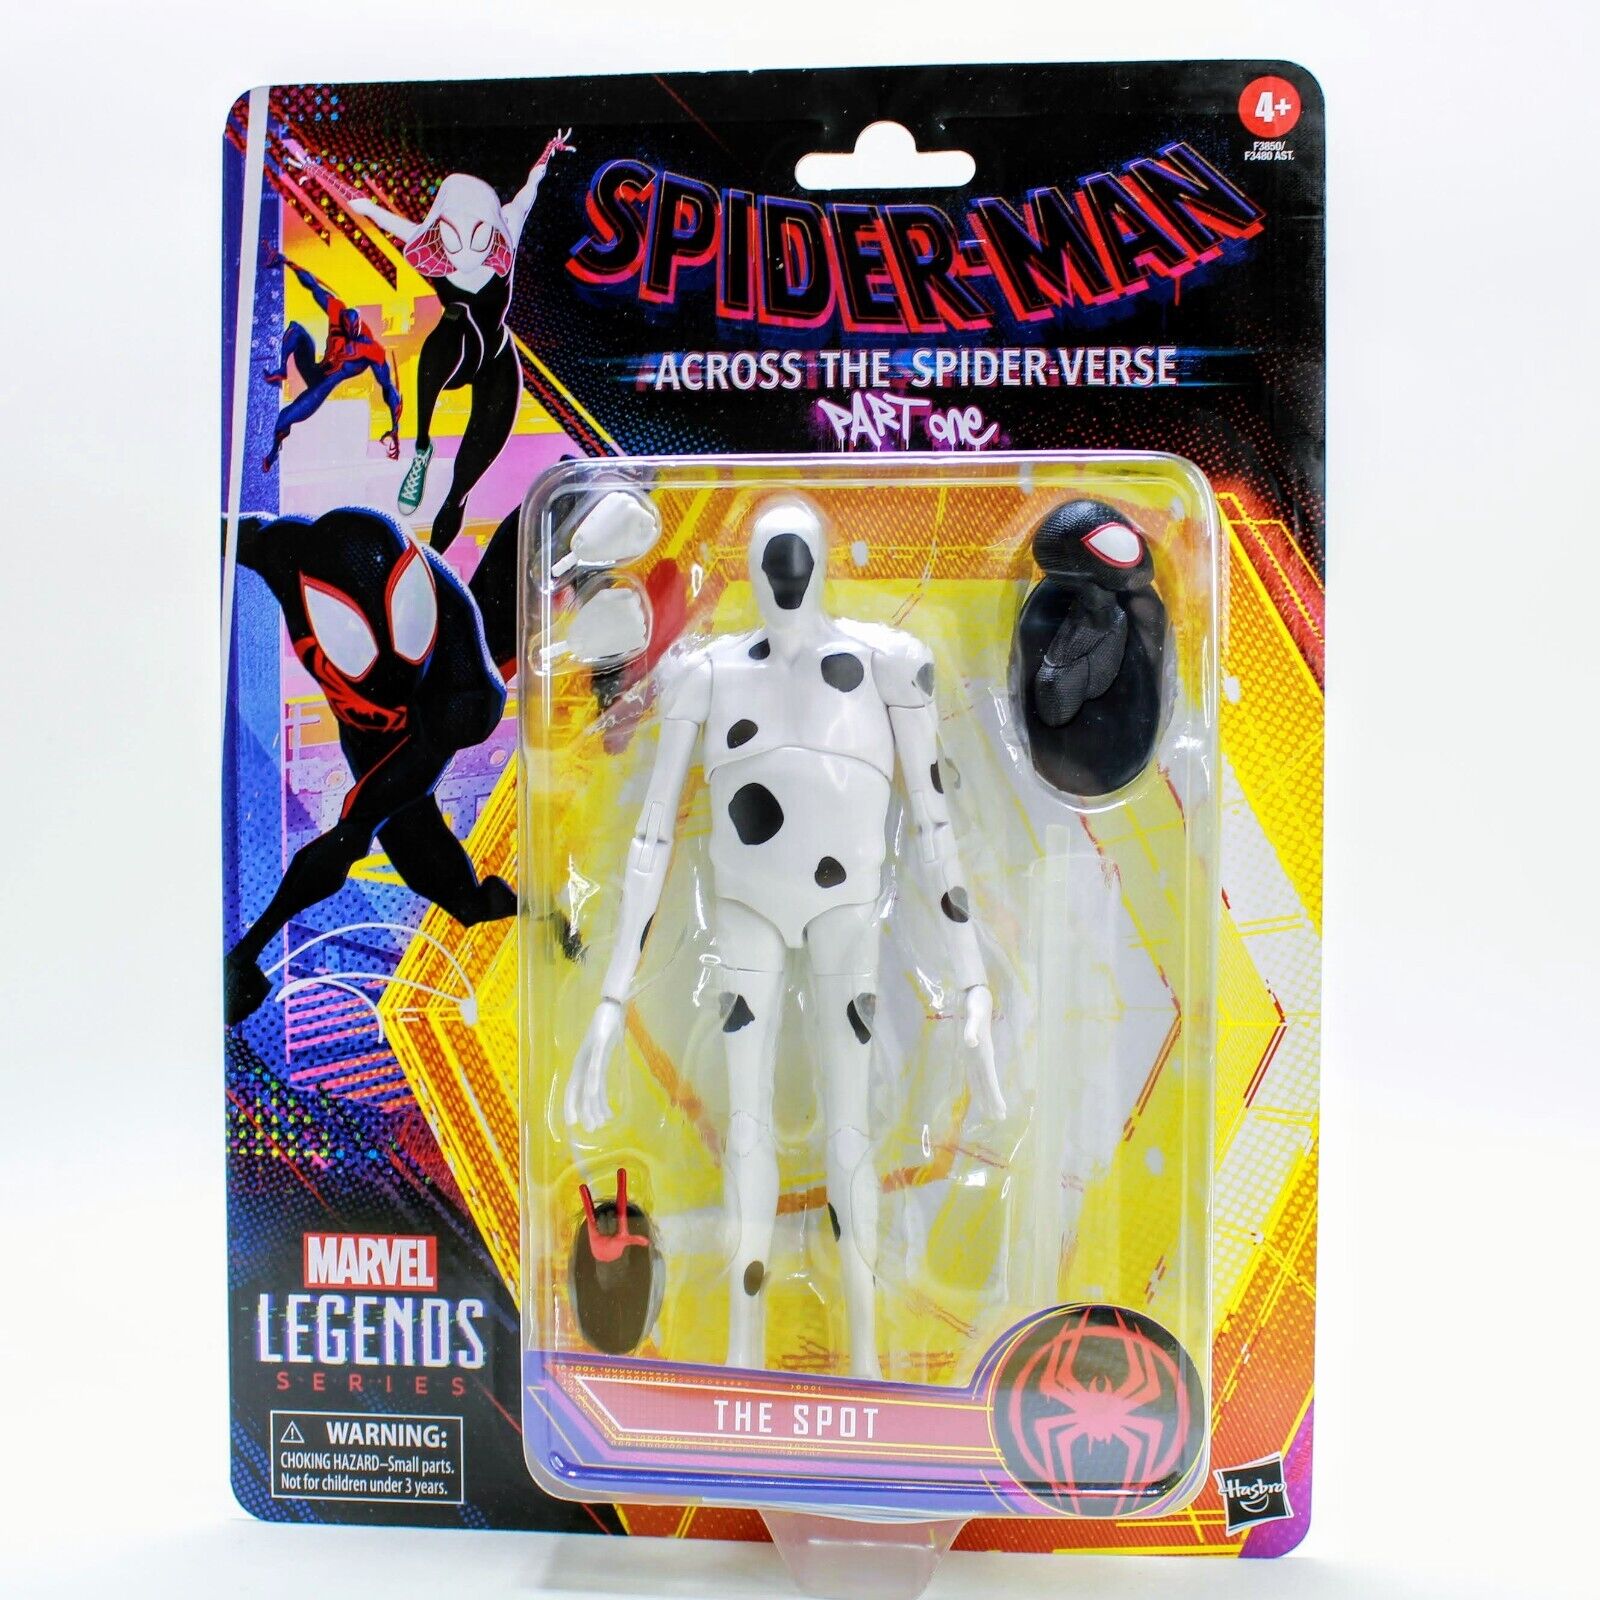 Marvel Legends Spider-Man The Spot - Across The Spider-Verse Part One 6" Figure